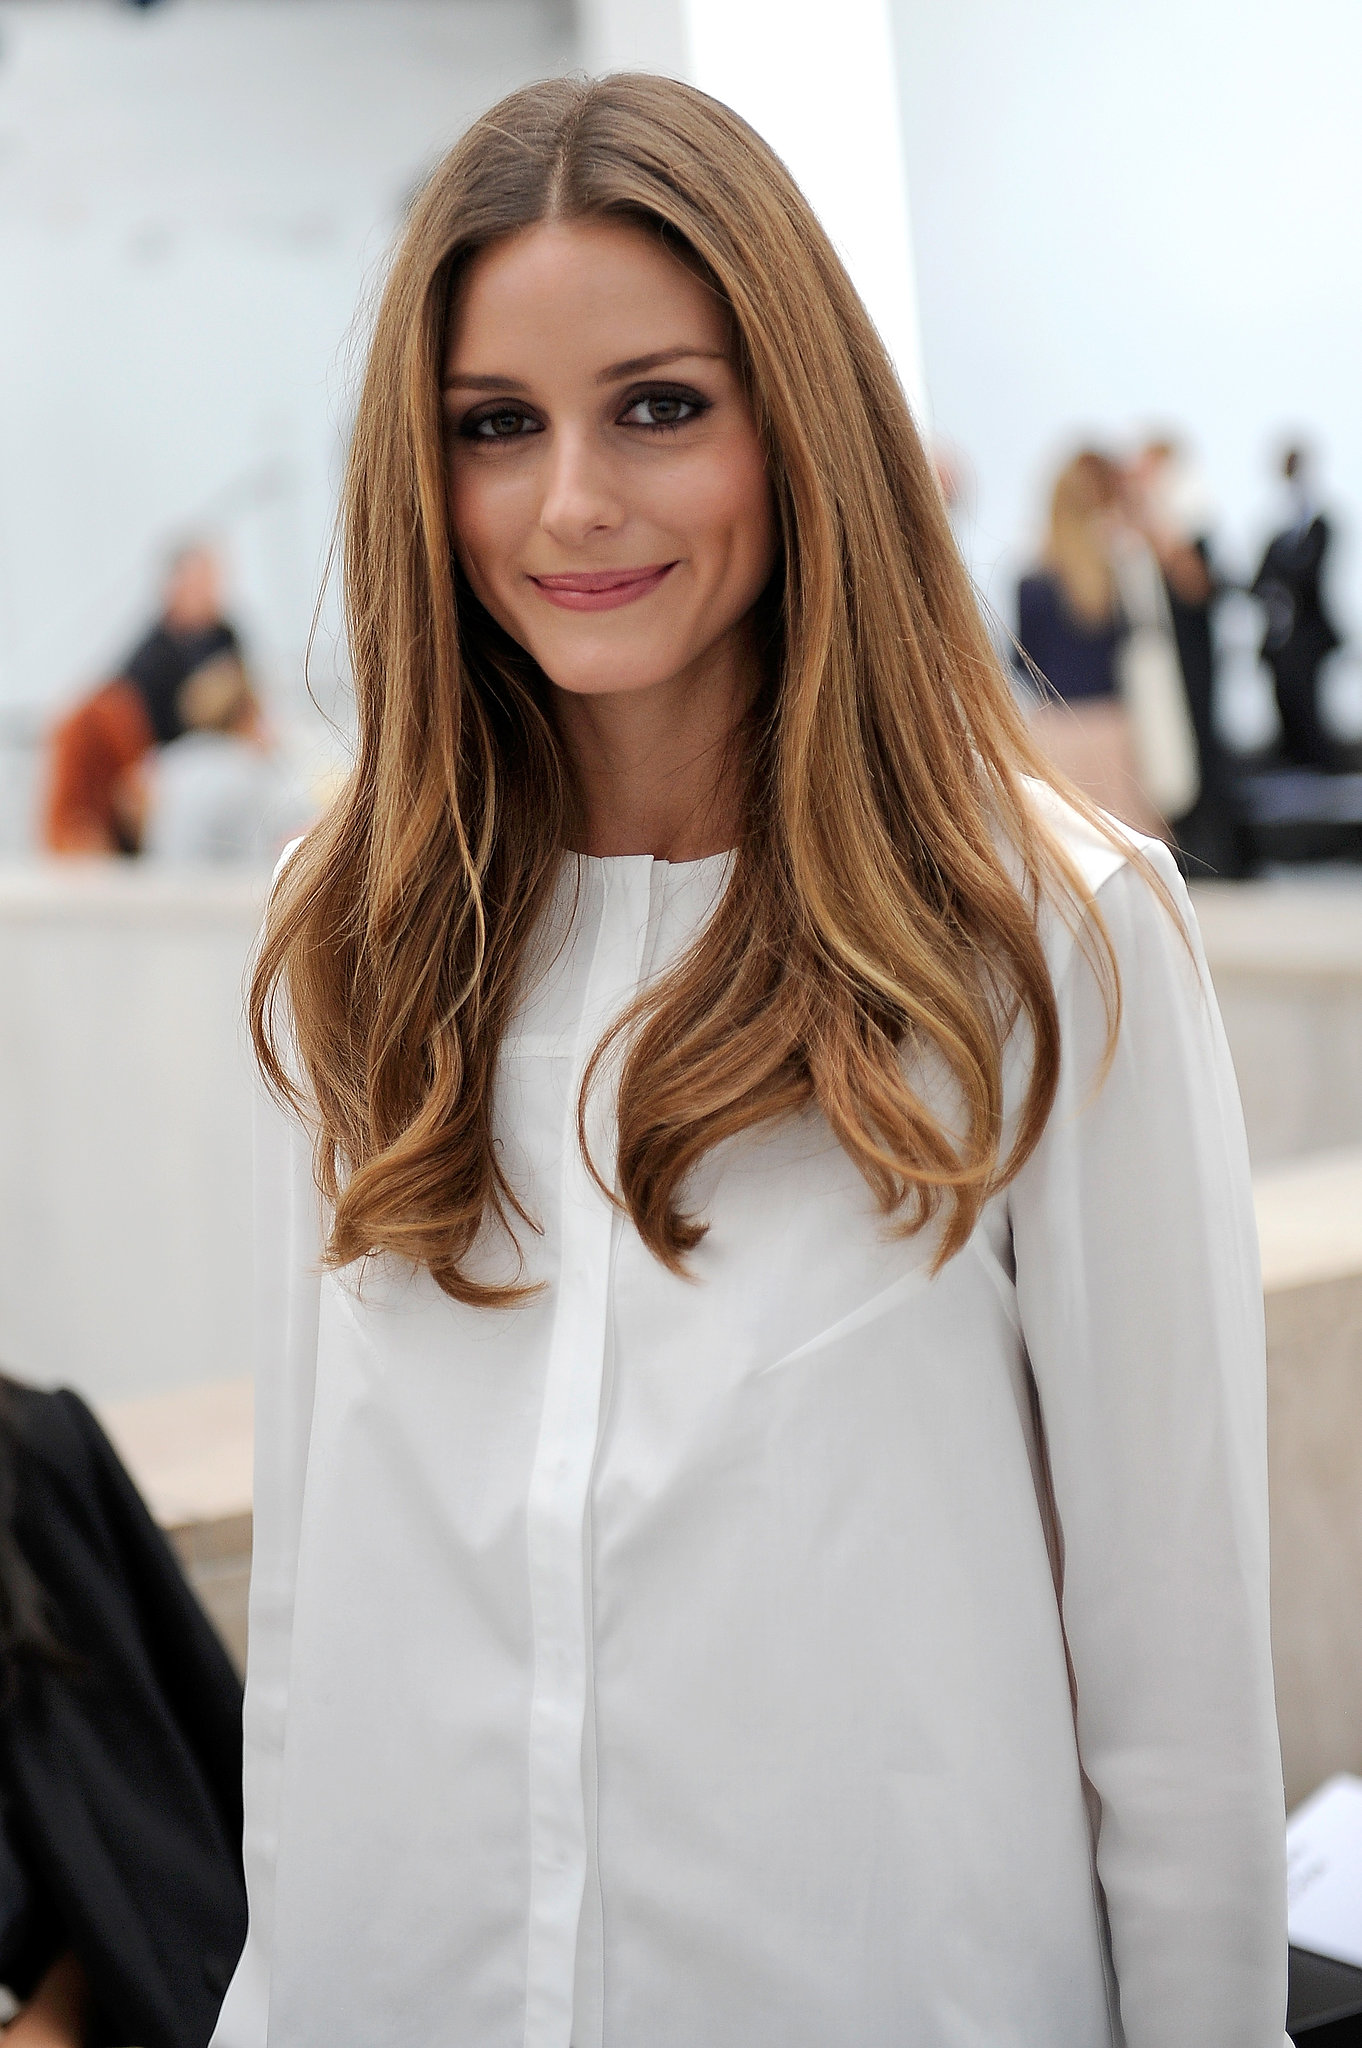 Olivia Palermo Wallpaper For Iphone Free - Olivia Palermo , HD Wallpaper & Backgrounds